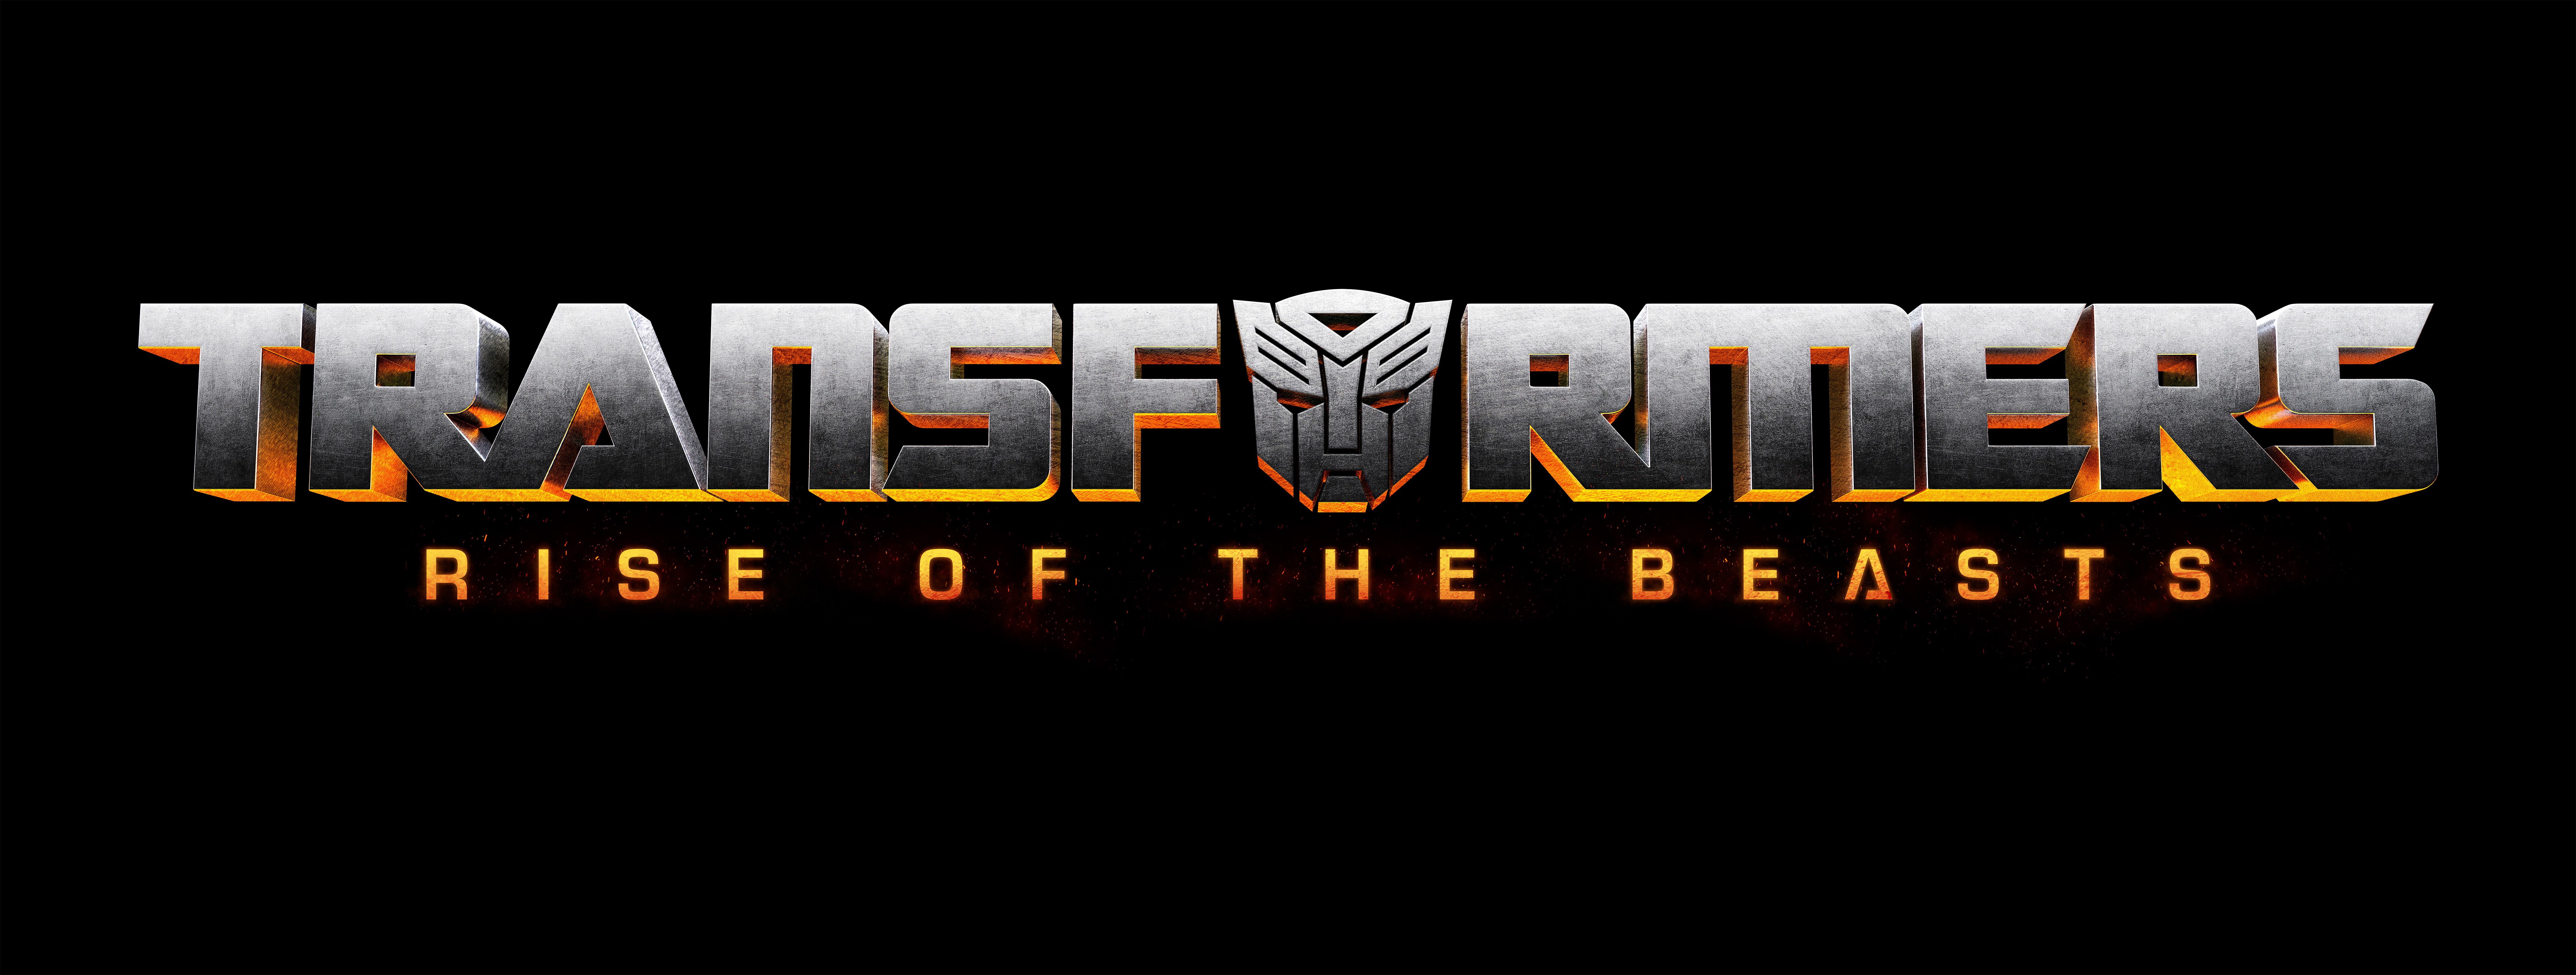 Transformers: Rise of the Beasts movie logo.